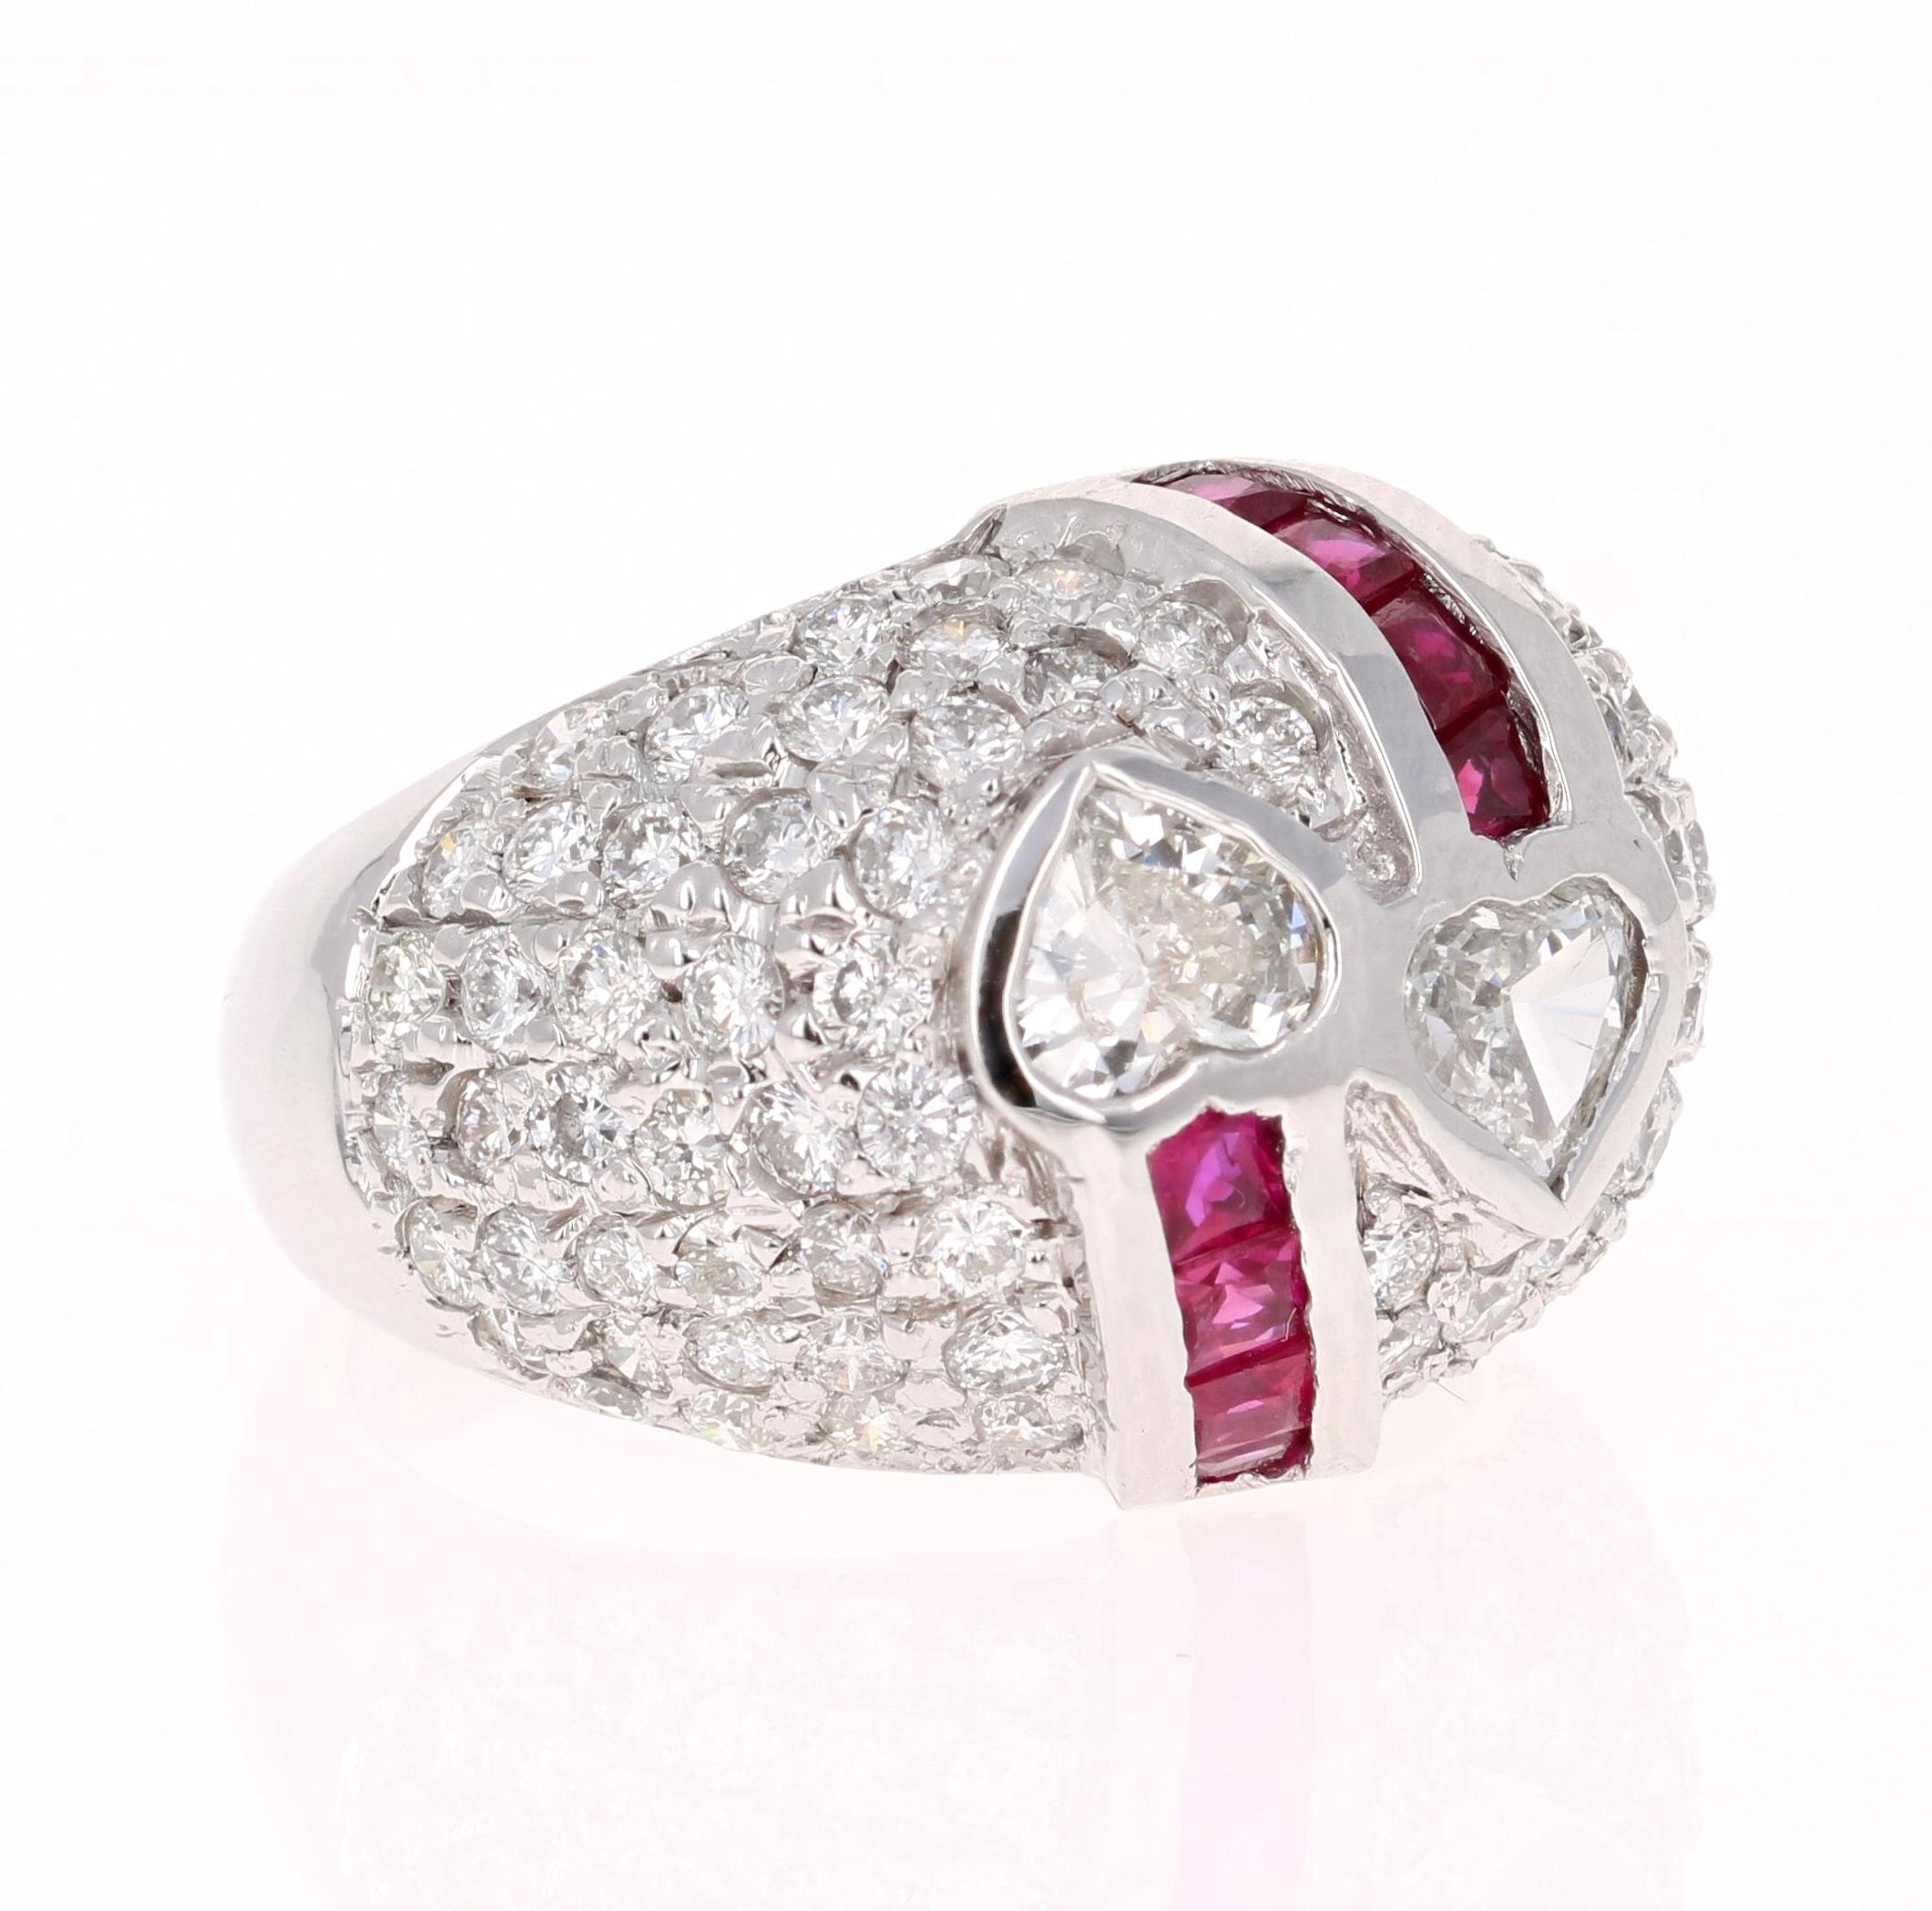 The ring has 2 Heart Cut Diamonds that weigh 0.72 carats and 86 Round Cut Diamonds that weigh 2.03 carats. The clarity and color of the diamonds are SI/F. There are 8 Rubies that weigh 0.66 carats. 

The ring is beautifully casted in 14K White Gold